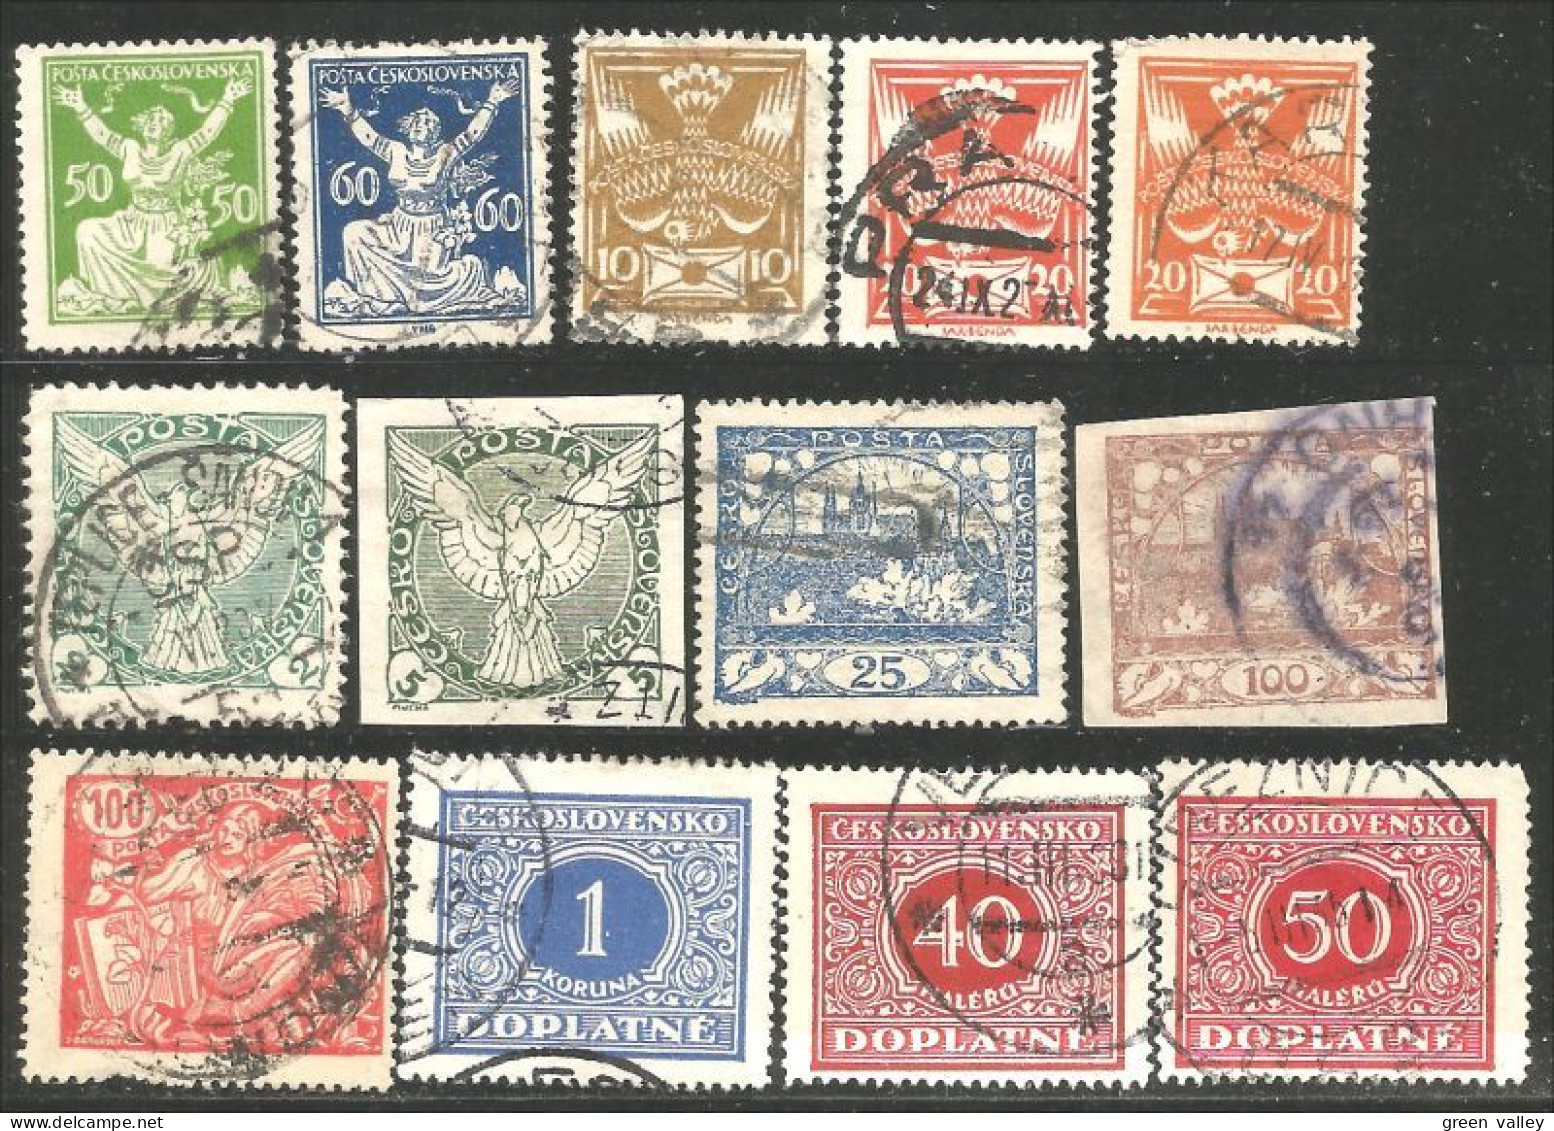 290 Czechoslovakia Taxes Postage Due Surcharge (CZE-251) - Used Stamps